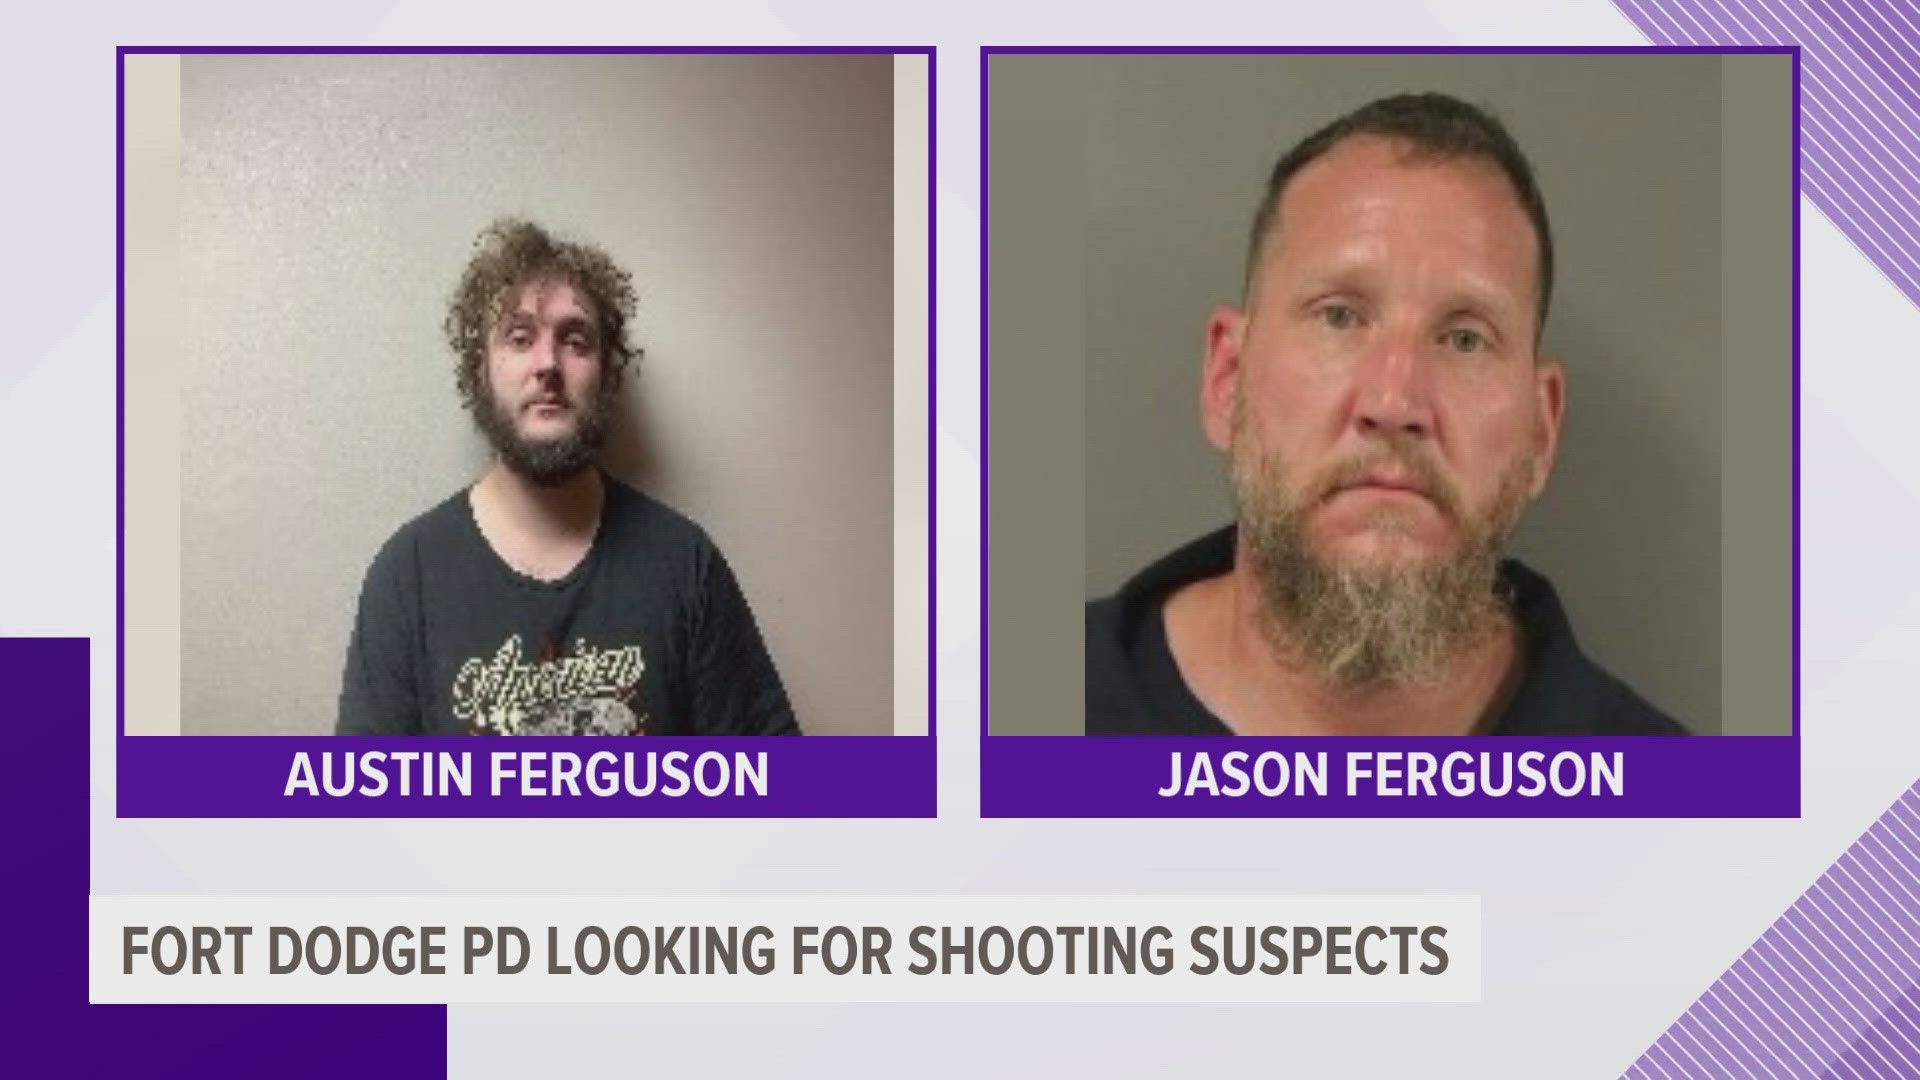 Both men are considered armed and dangerous, and there is $250 reward for information that leads to their arrests.